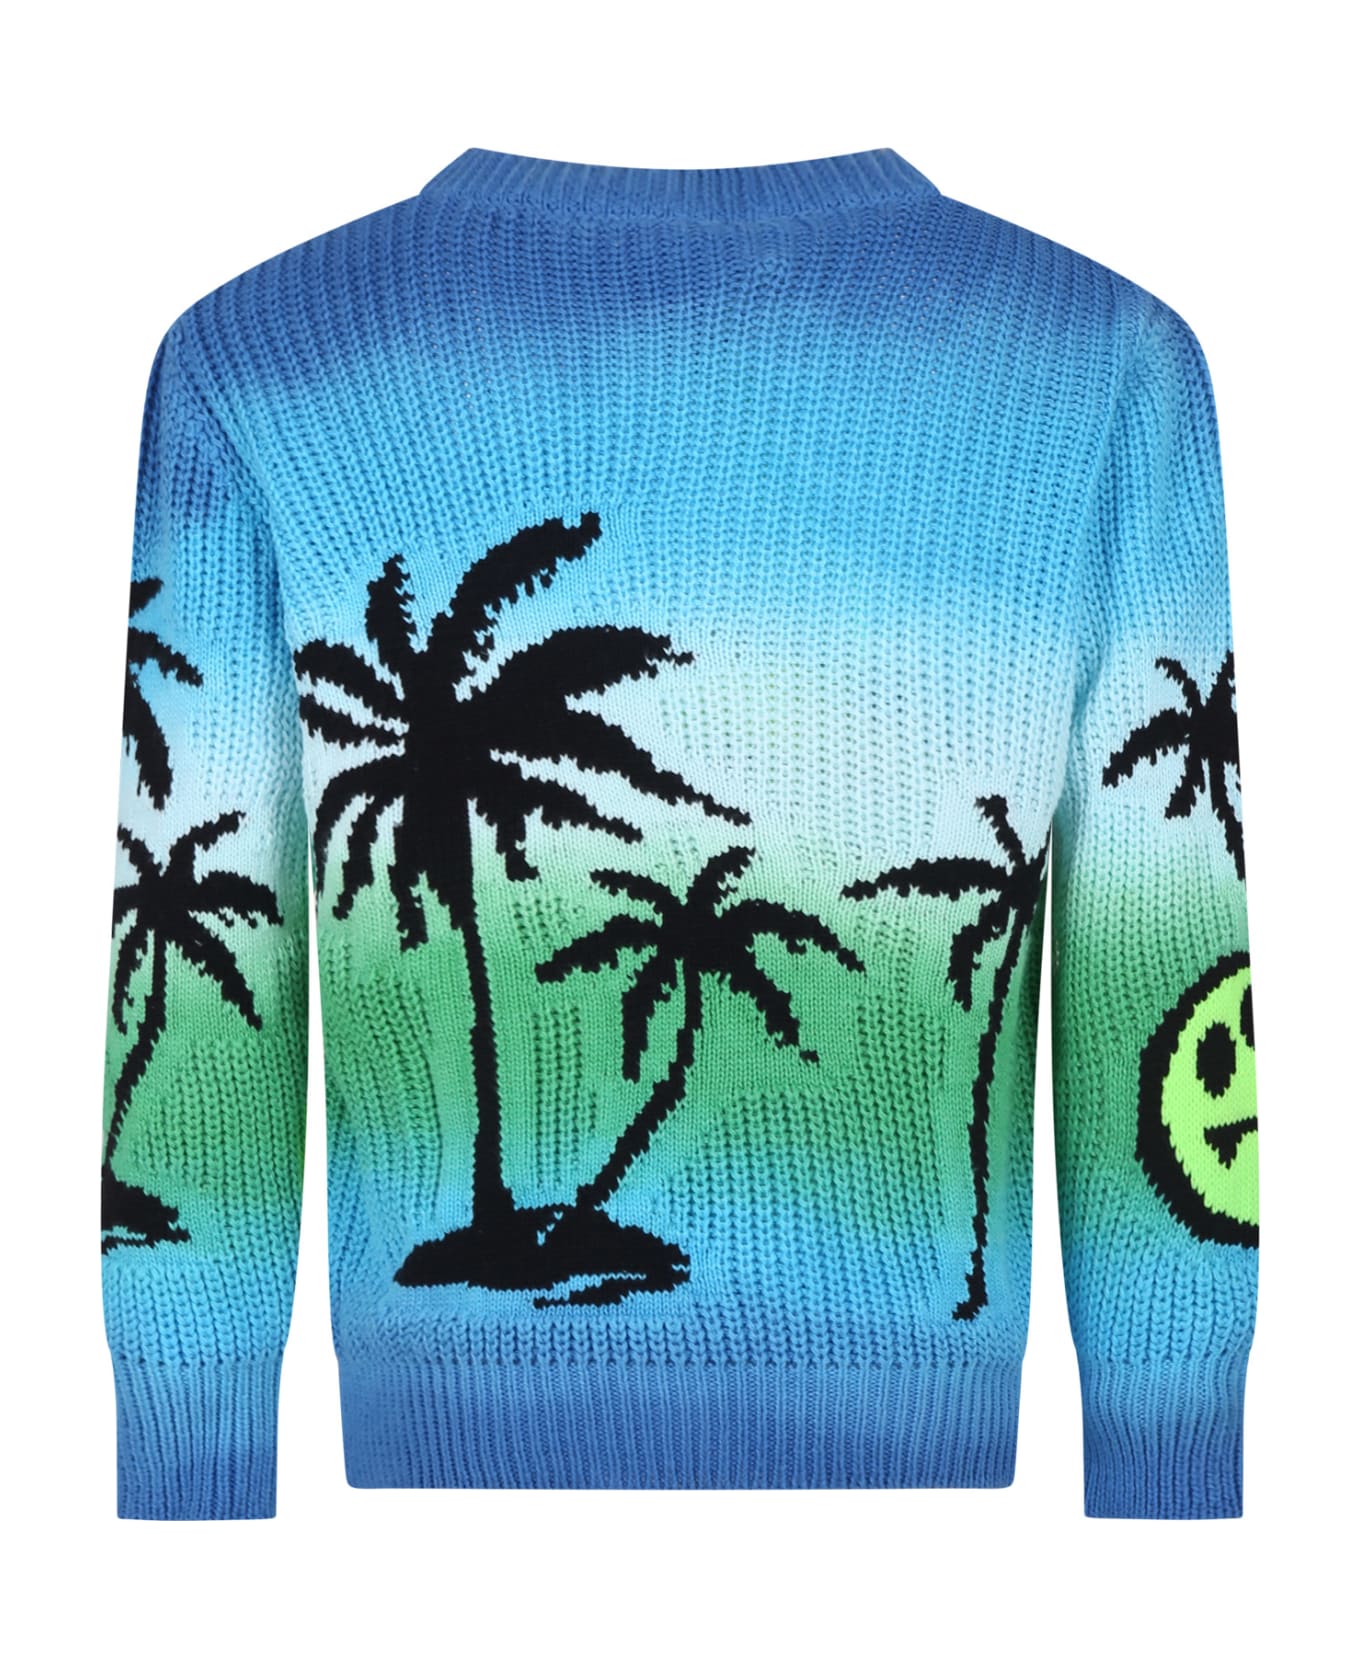 Barrow Light Blue Cotton Sweater For Kids With Smiley And Palm Trees - Light Blue ニットウェア＆スウェットシャツ